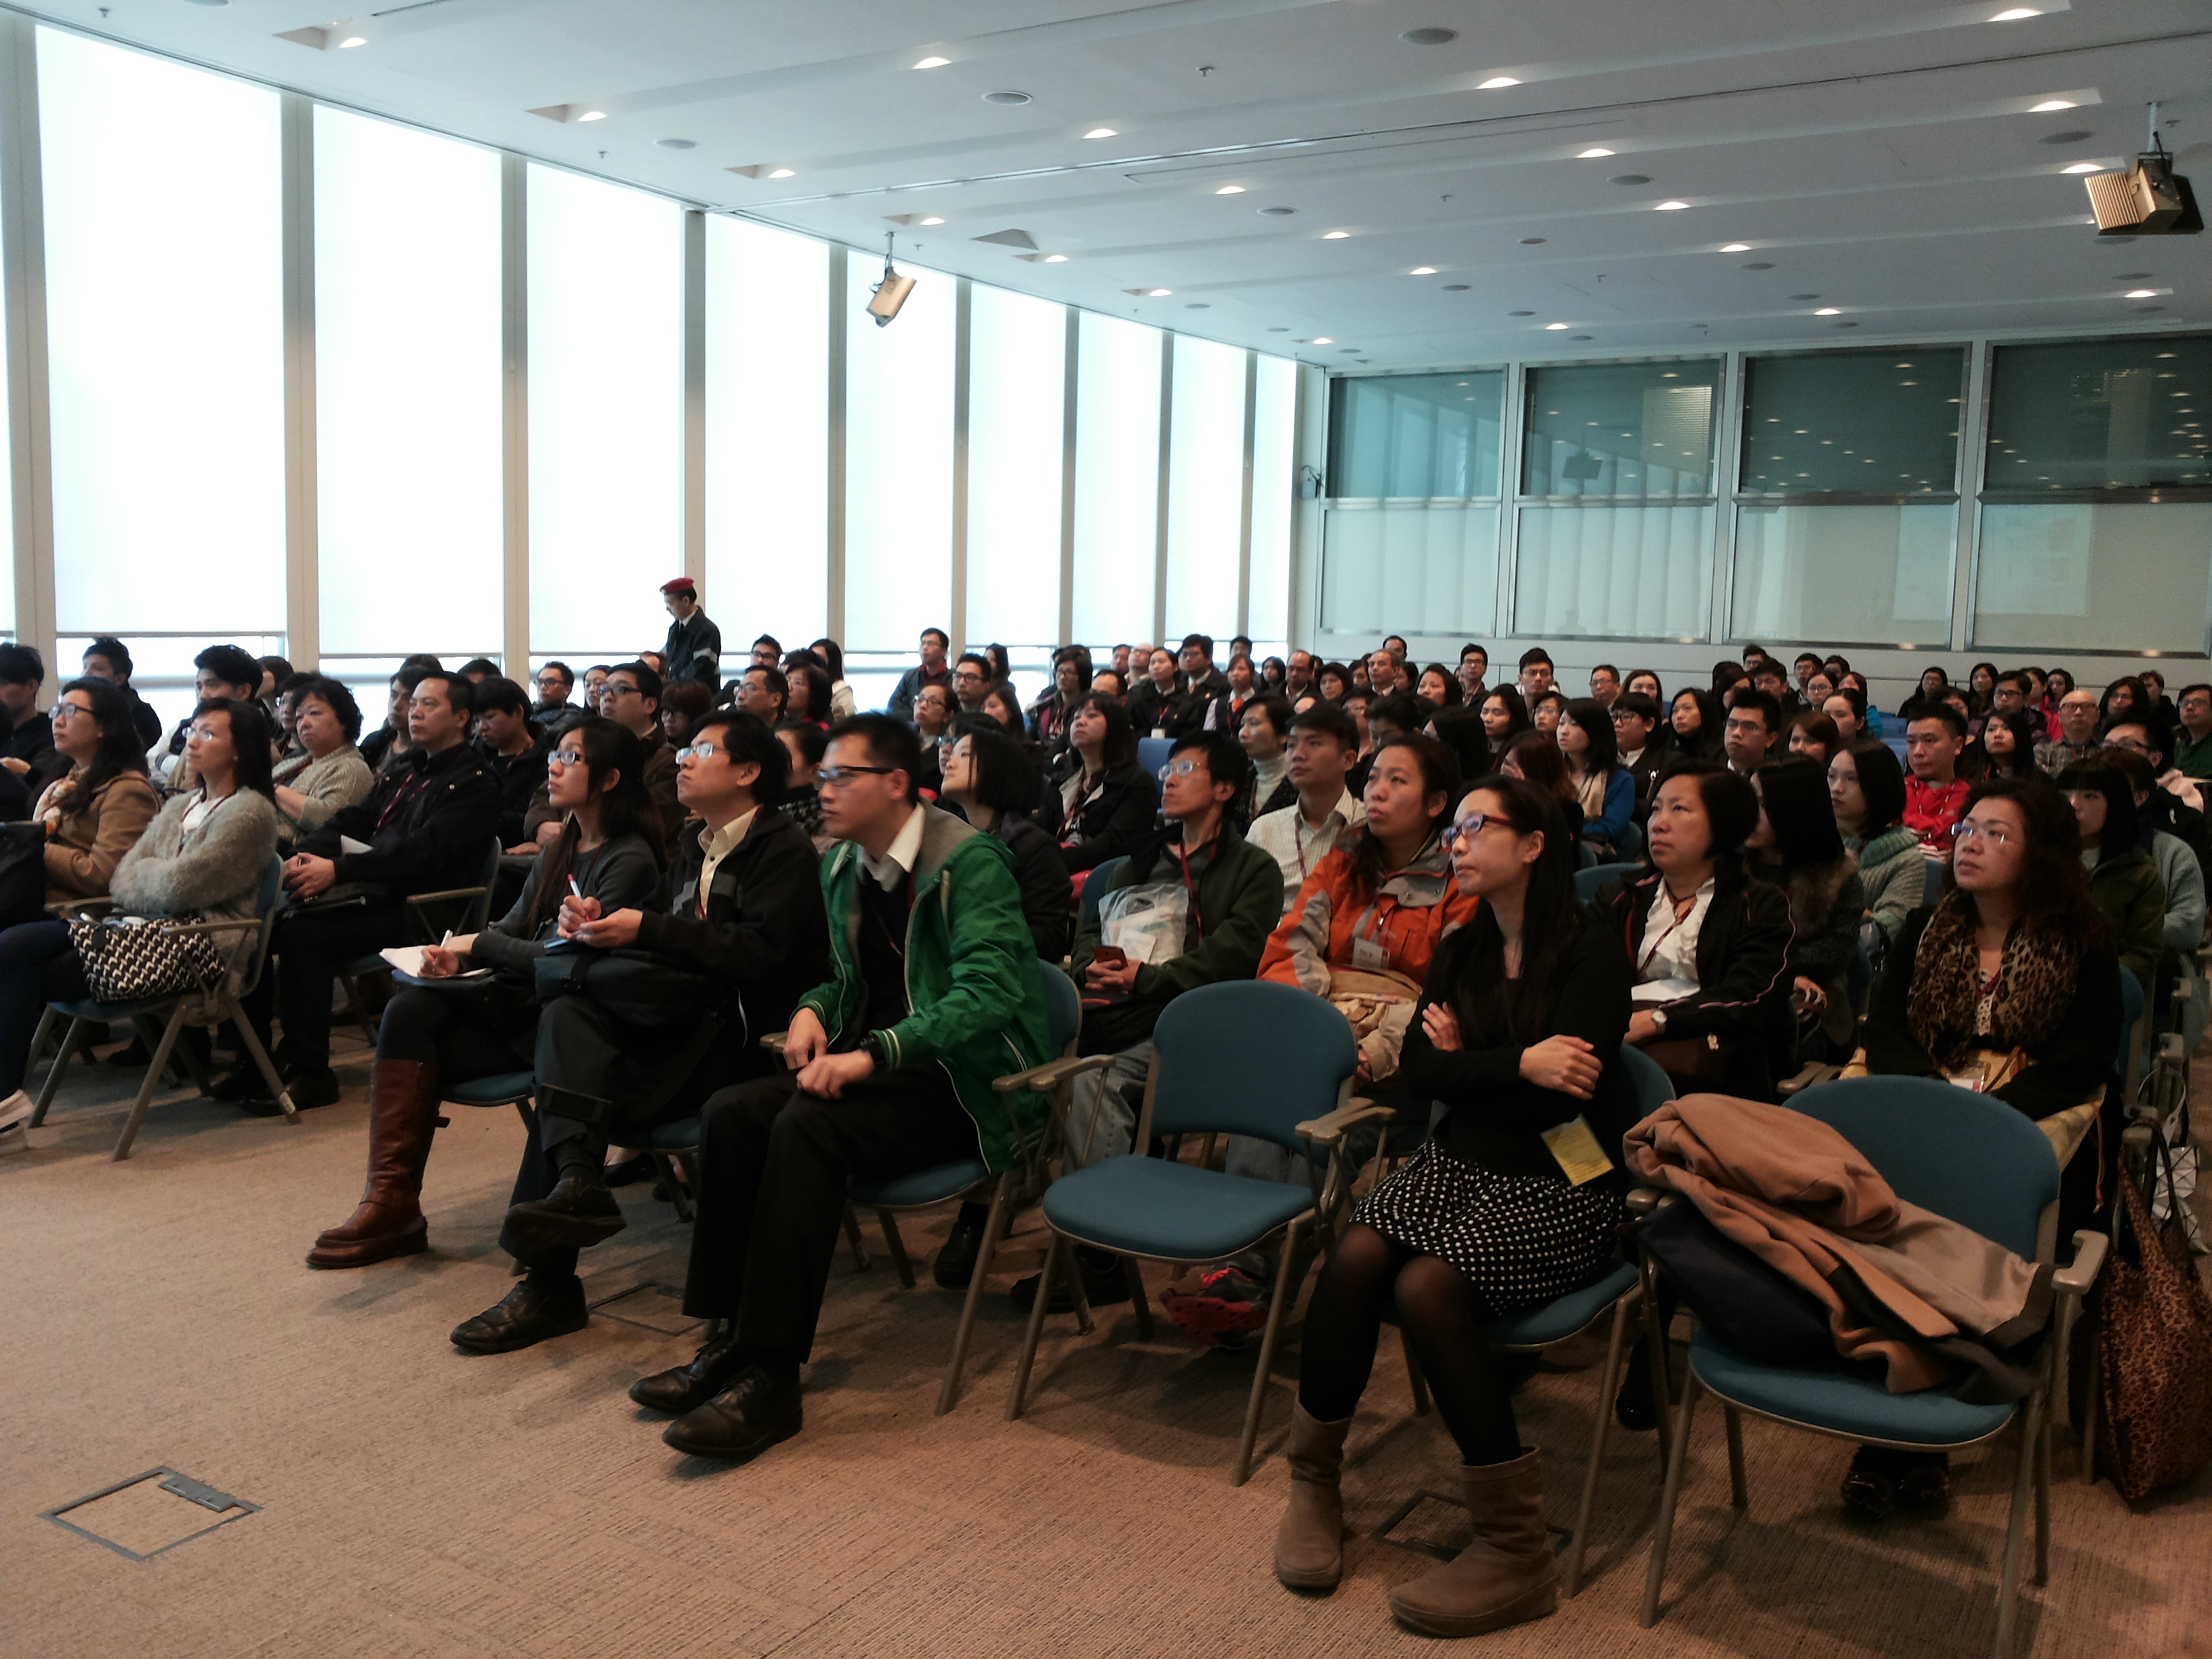 In the past two weeks, the HKMA and the Police organised 15 seminars on identifying counterfeit notes. Some 3,000 people have attended these seminars. Apart from banking staff, the HKMA also invited employees of large retail business and catering operators to attend to help strengthen their ability to detect counterfeit notes.